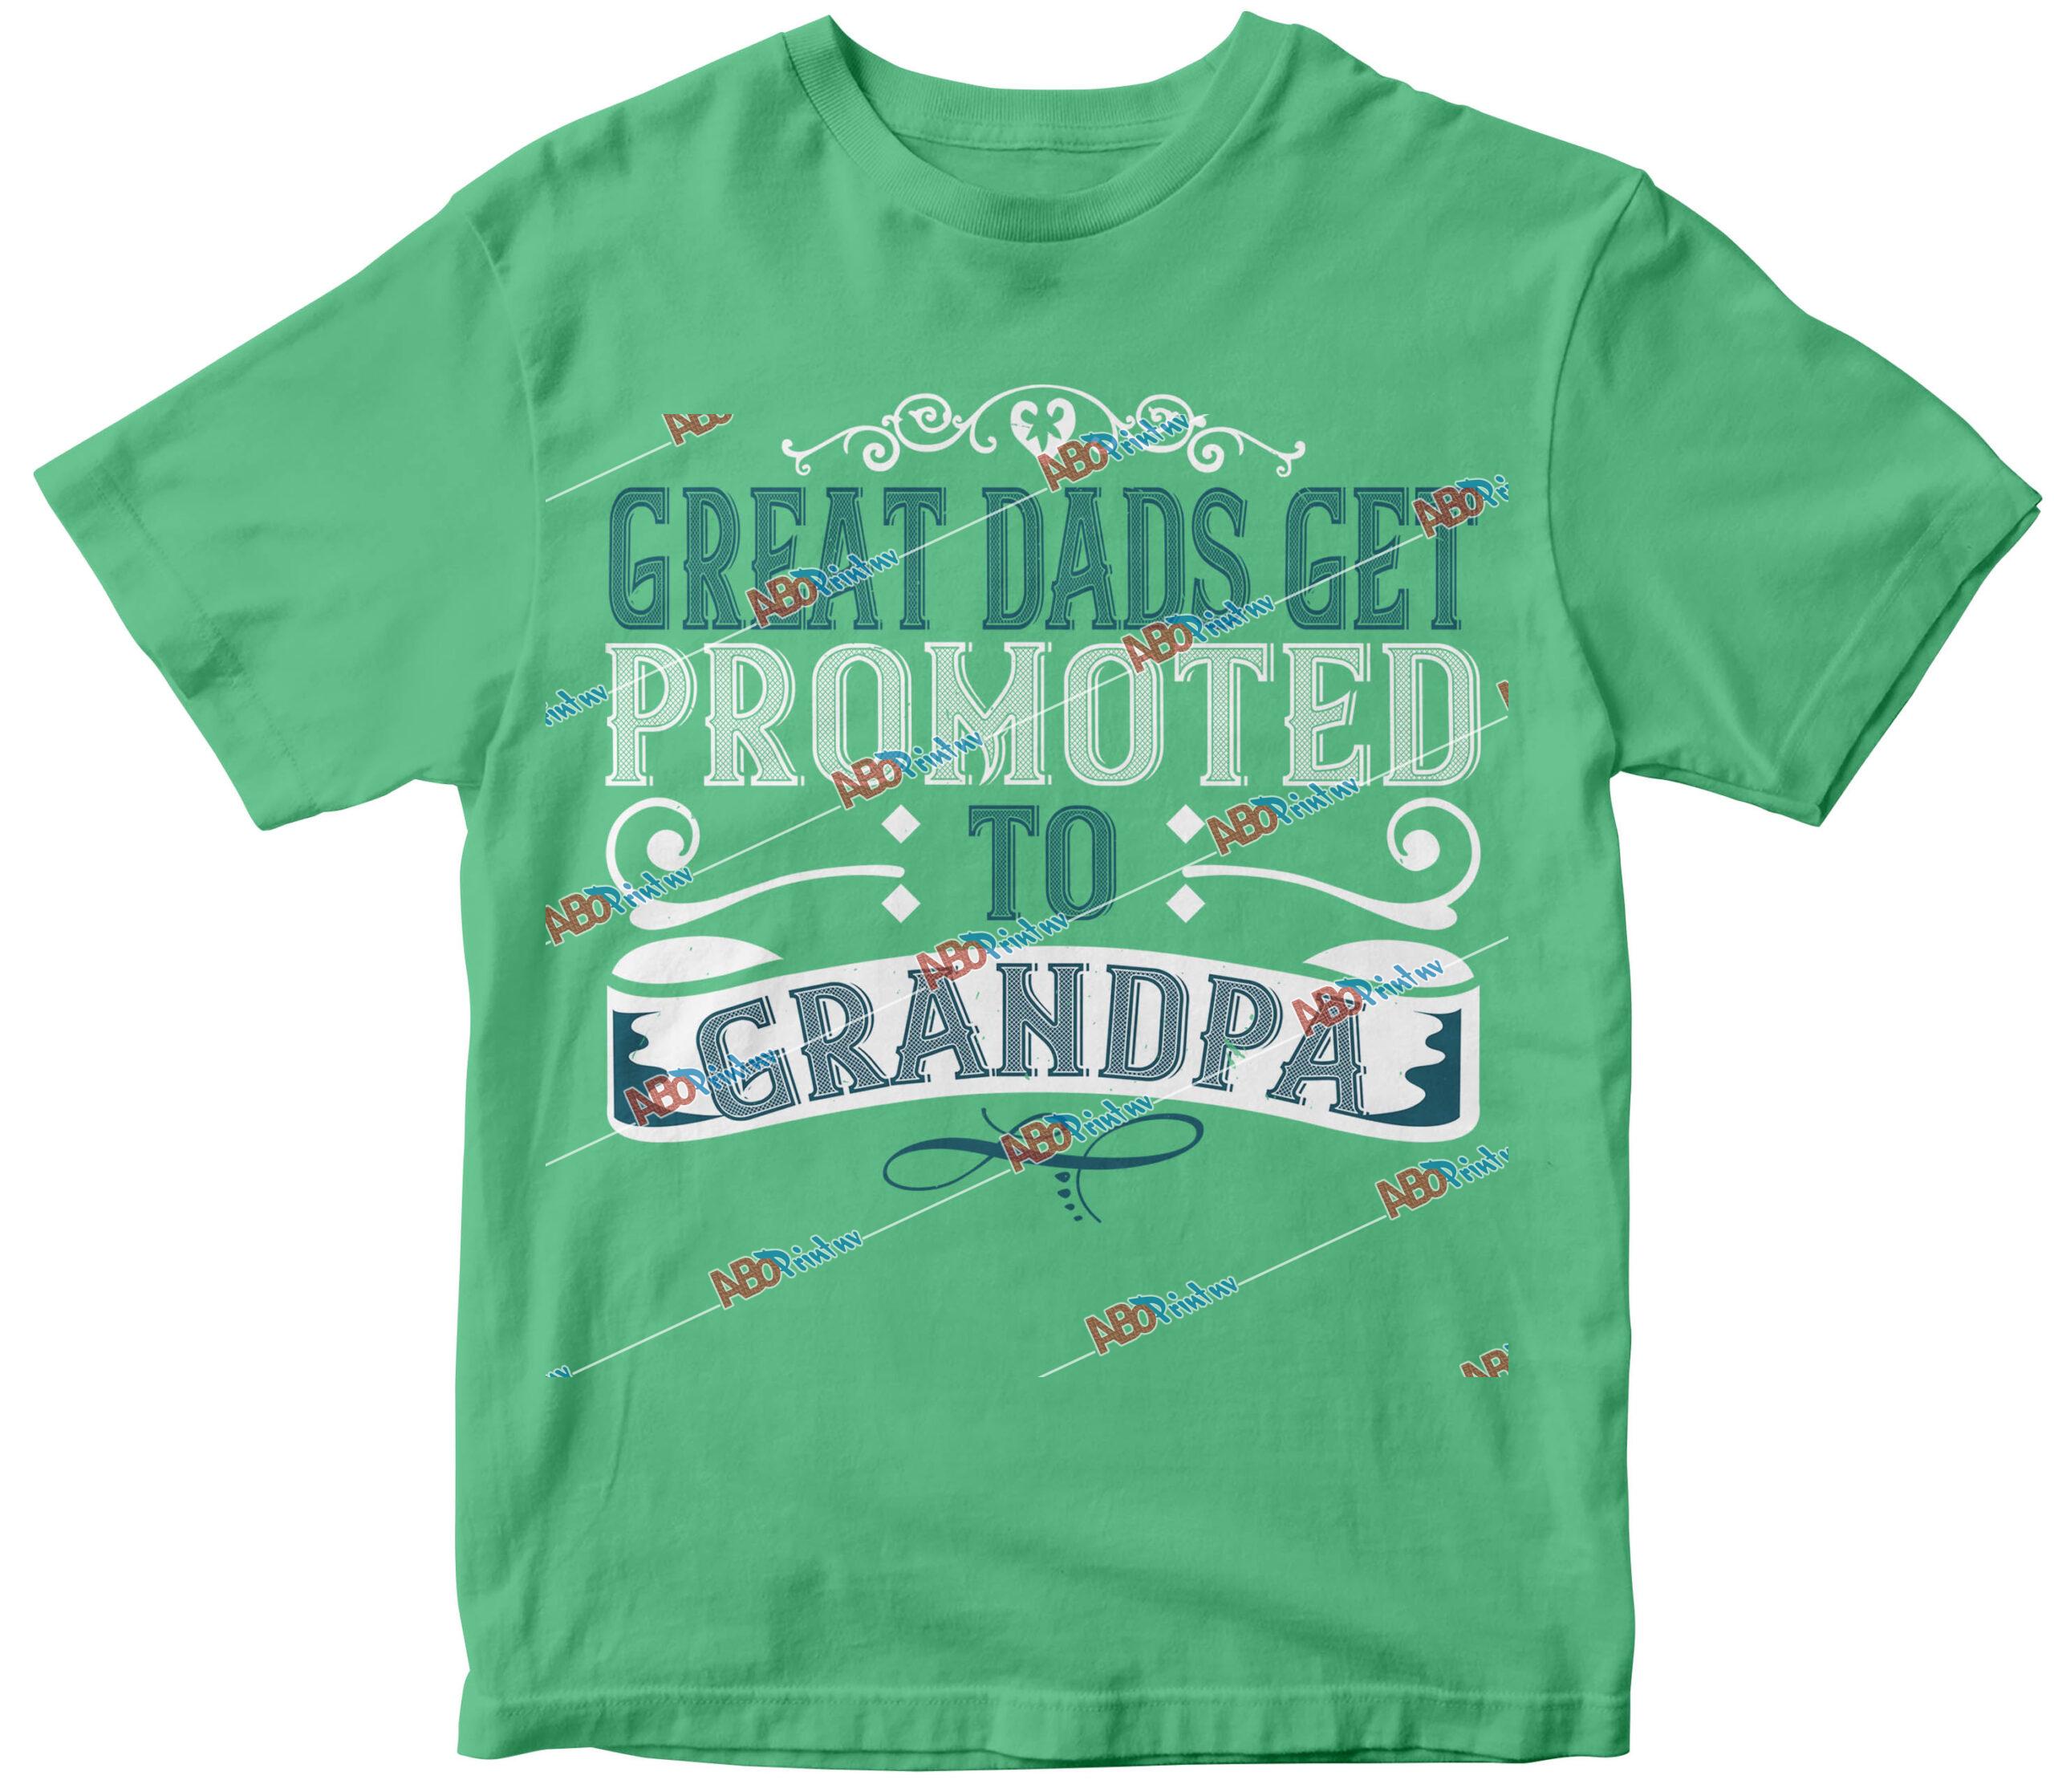 Great dads get promoted to grandpa-02.jpg